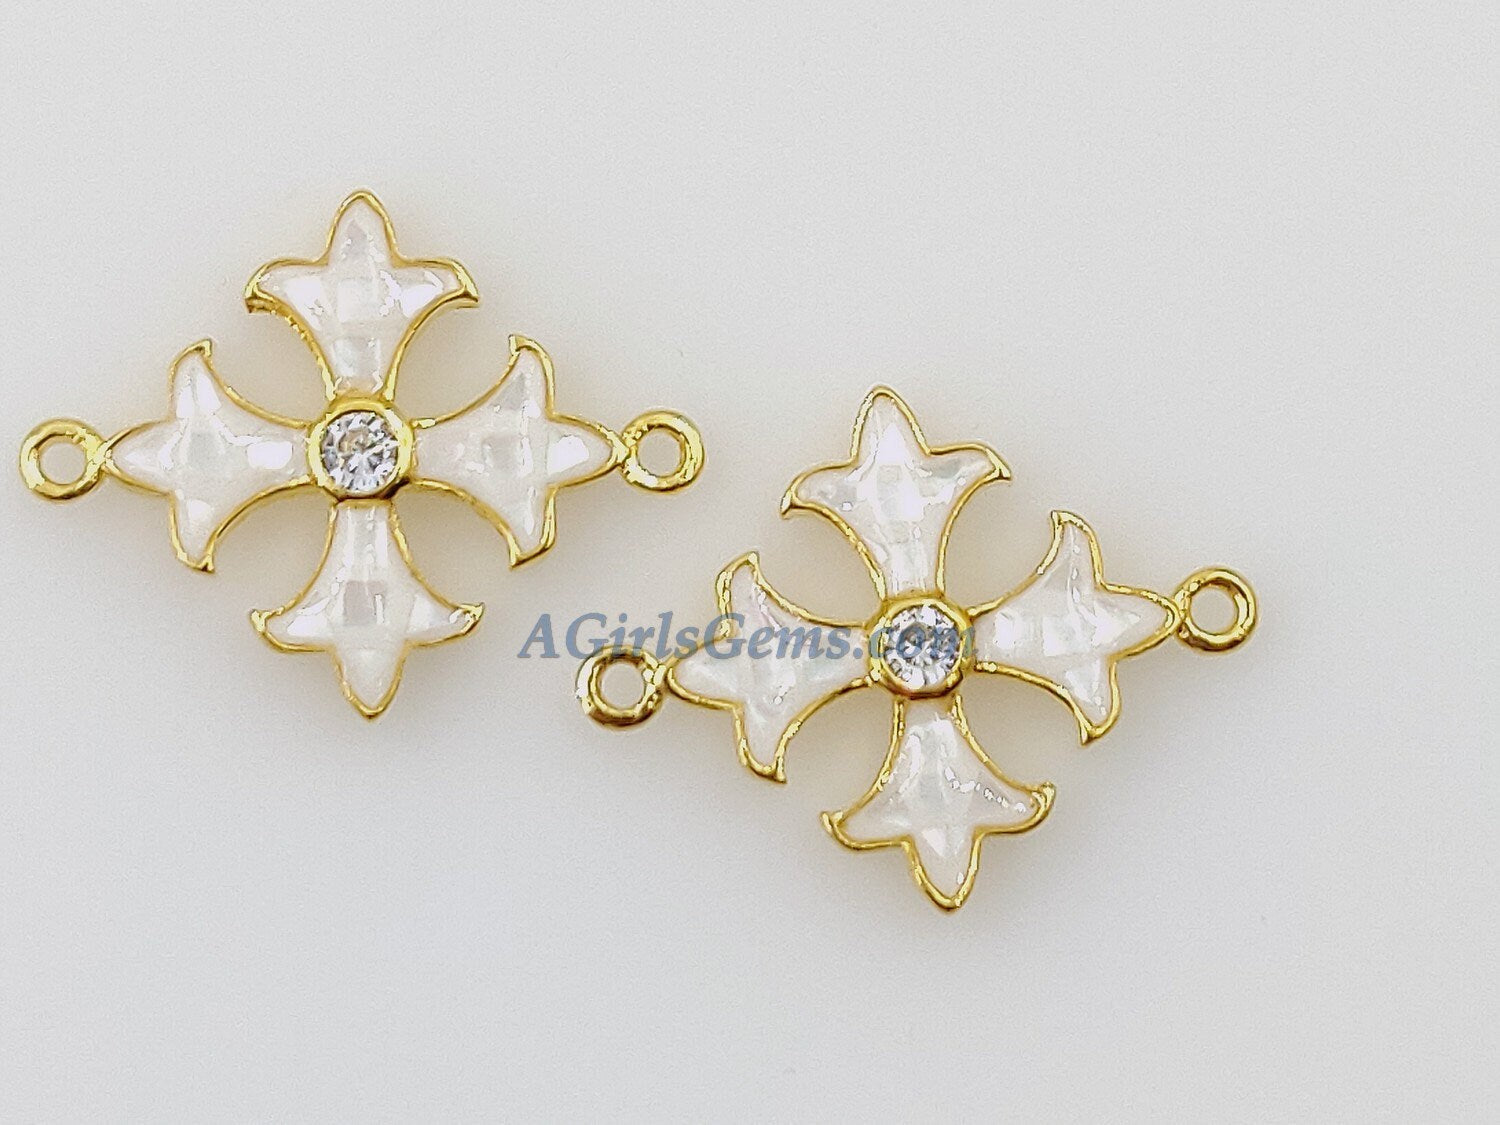 Crusader Cross Connectors, CZ Micro Pave 18 k Gold Plated White Shell New Coptic Cross Beads, Maltese Cross Link